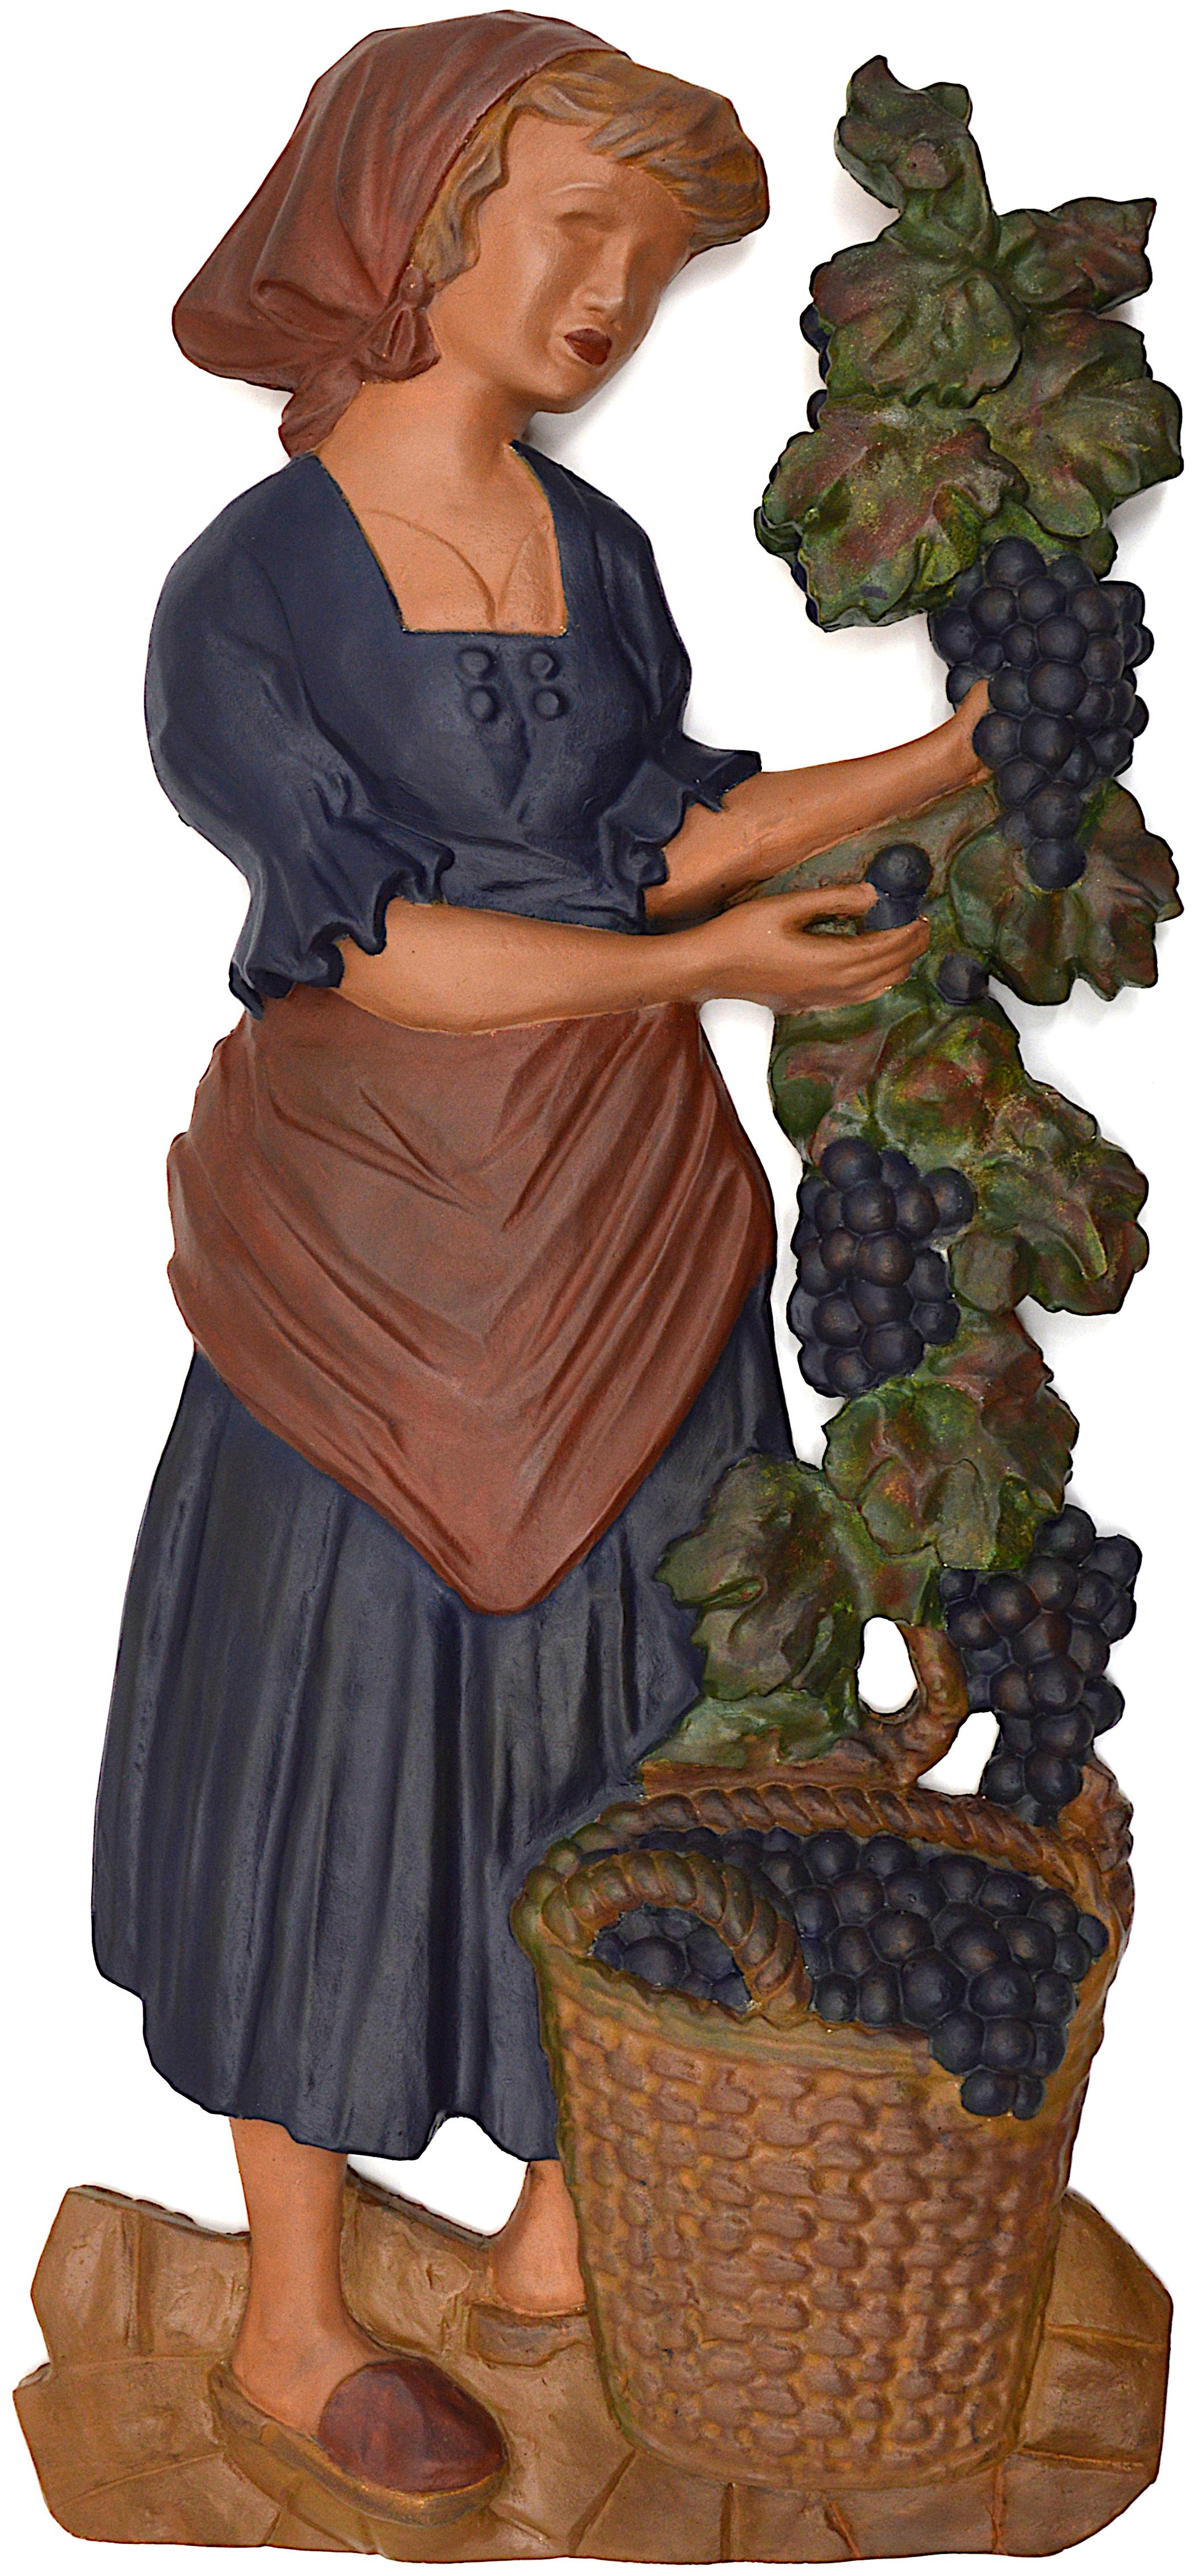 French Art Deco couple of grape pickers, France, 1920s. These large plaster sculptures adorned the entrance to a cellar of a vineyard. Measures: The woman - height 35.4